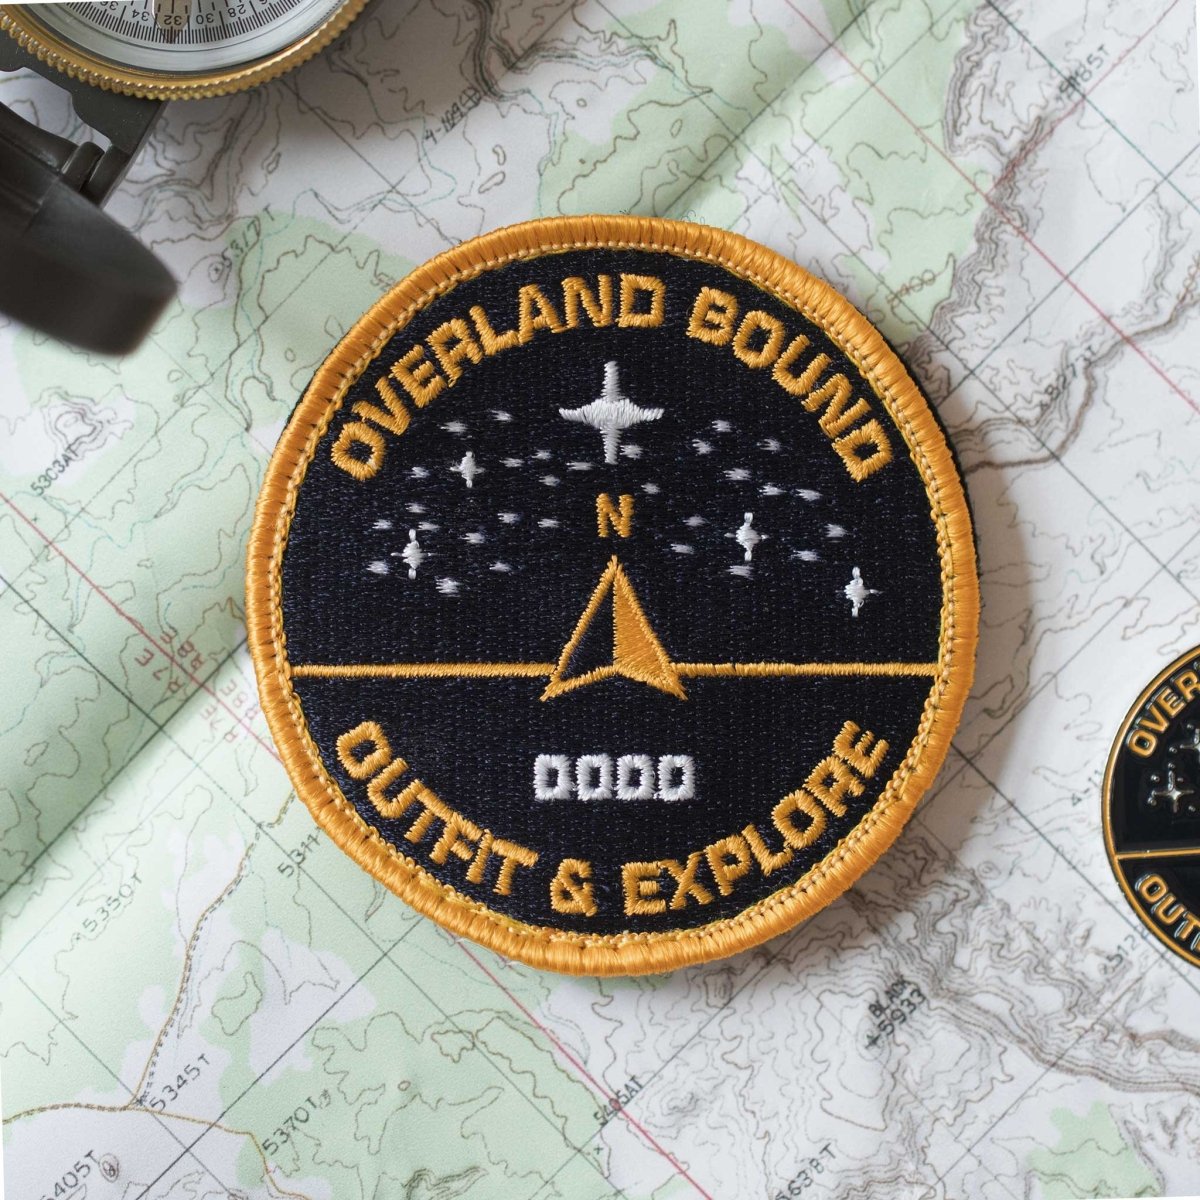 Find Your North Limited Edition Set - Overland Bound